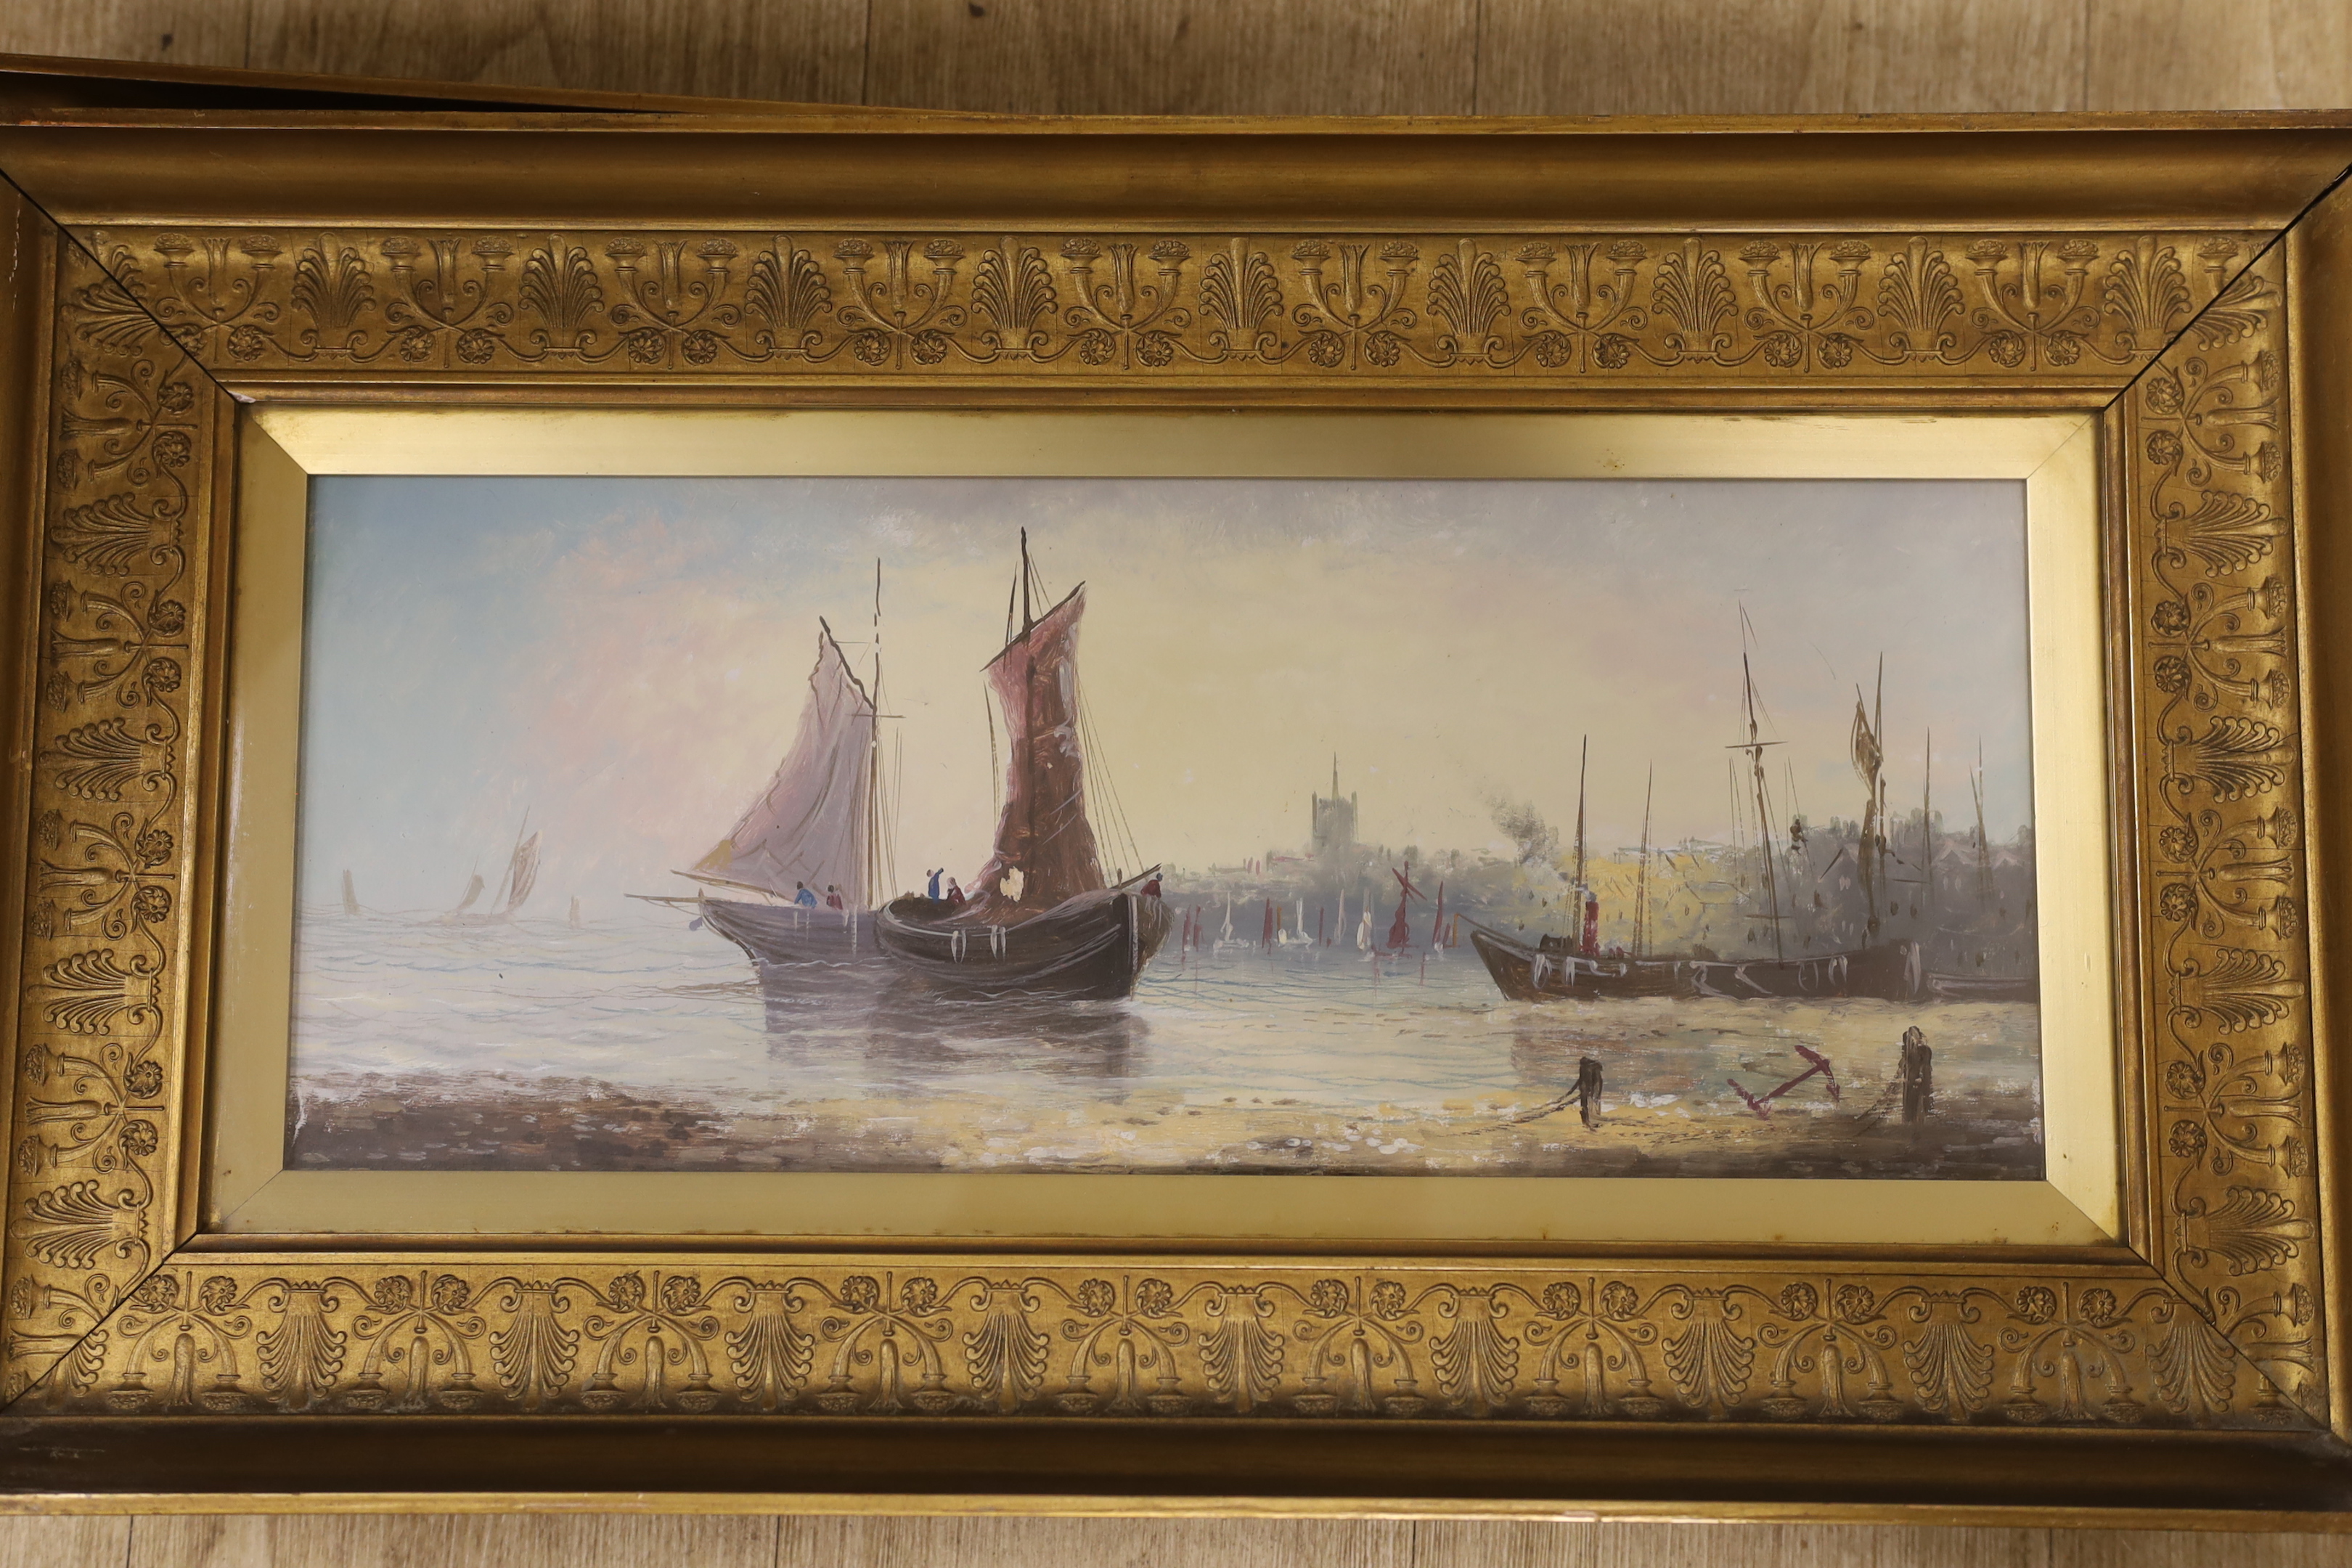 19th century, Continental School, pair of oils on board, Coastal scenes with moored fishing boats, one indistinctly signed, partially obscured by the mount, 18 x 46cm, ornate gilt framed